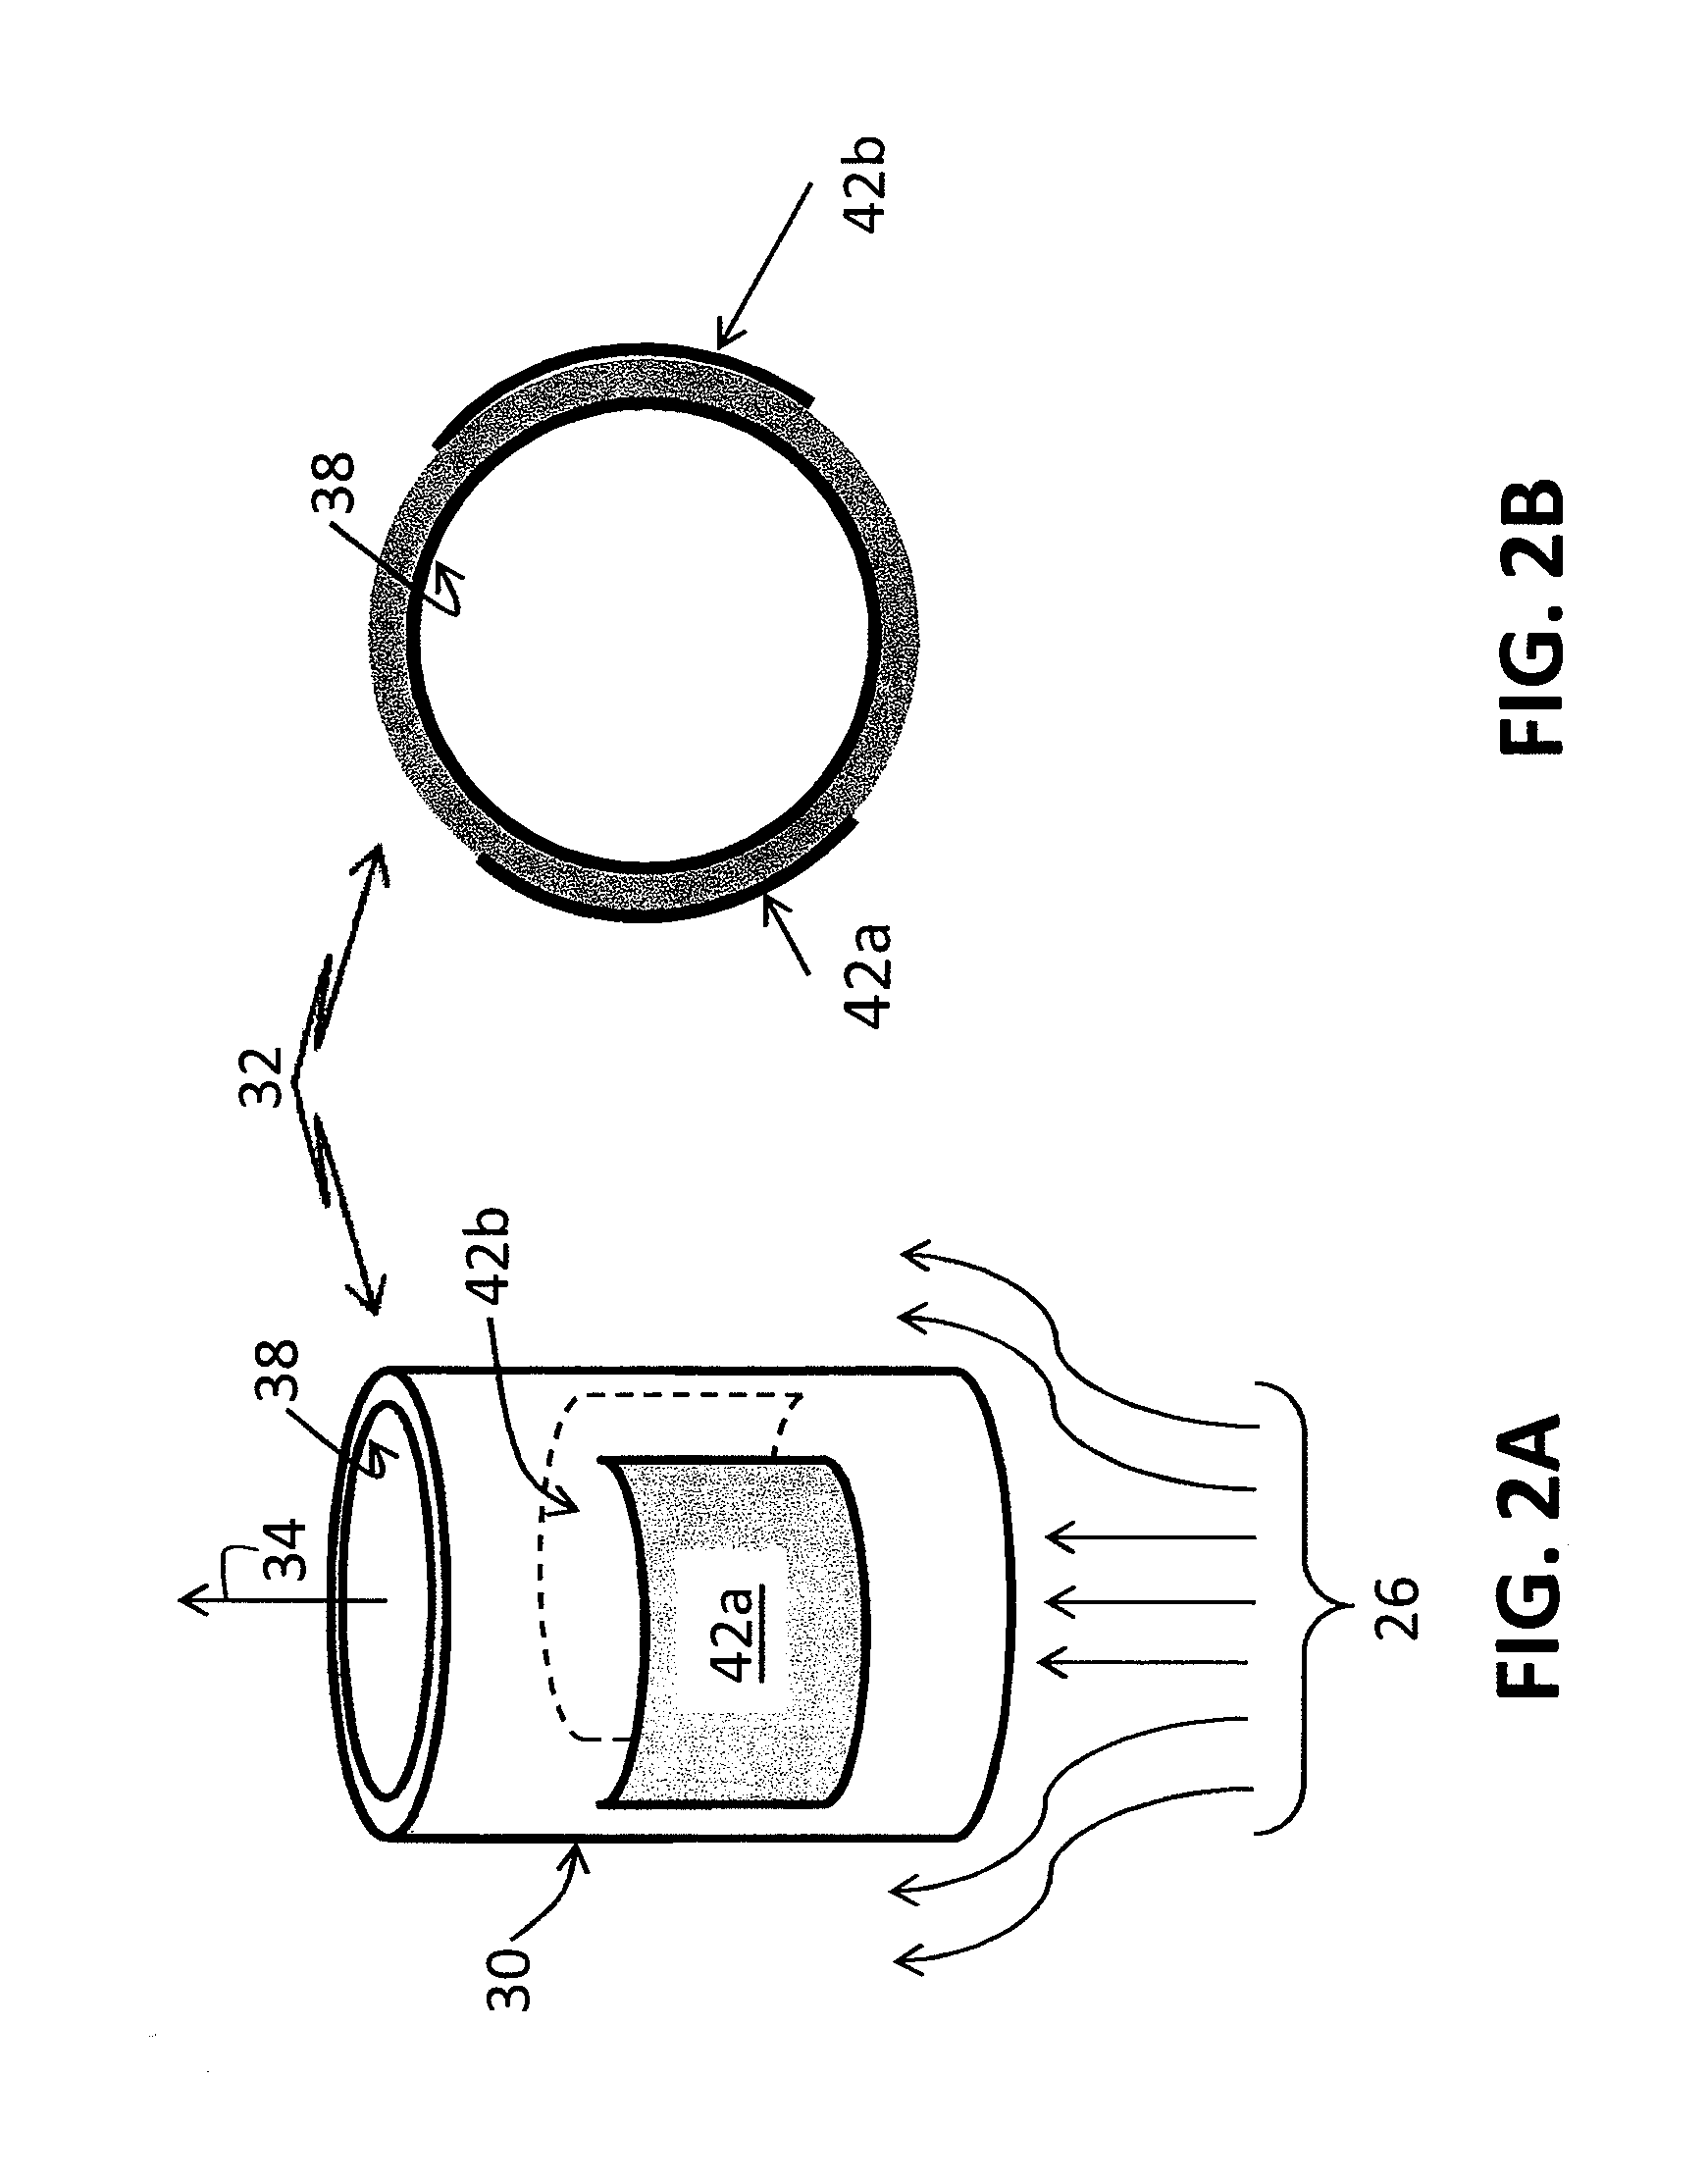 Integrated acoustic phase separator and multiphase fluid composition monitoring apparatus and method